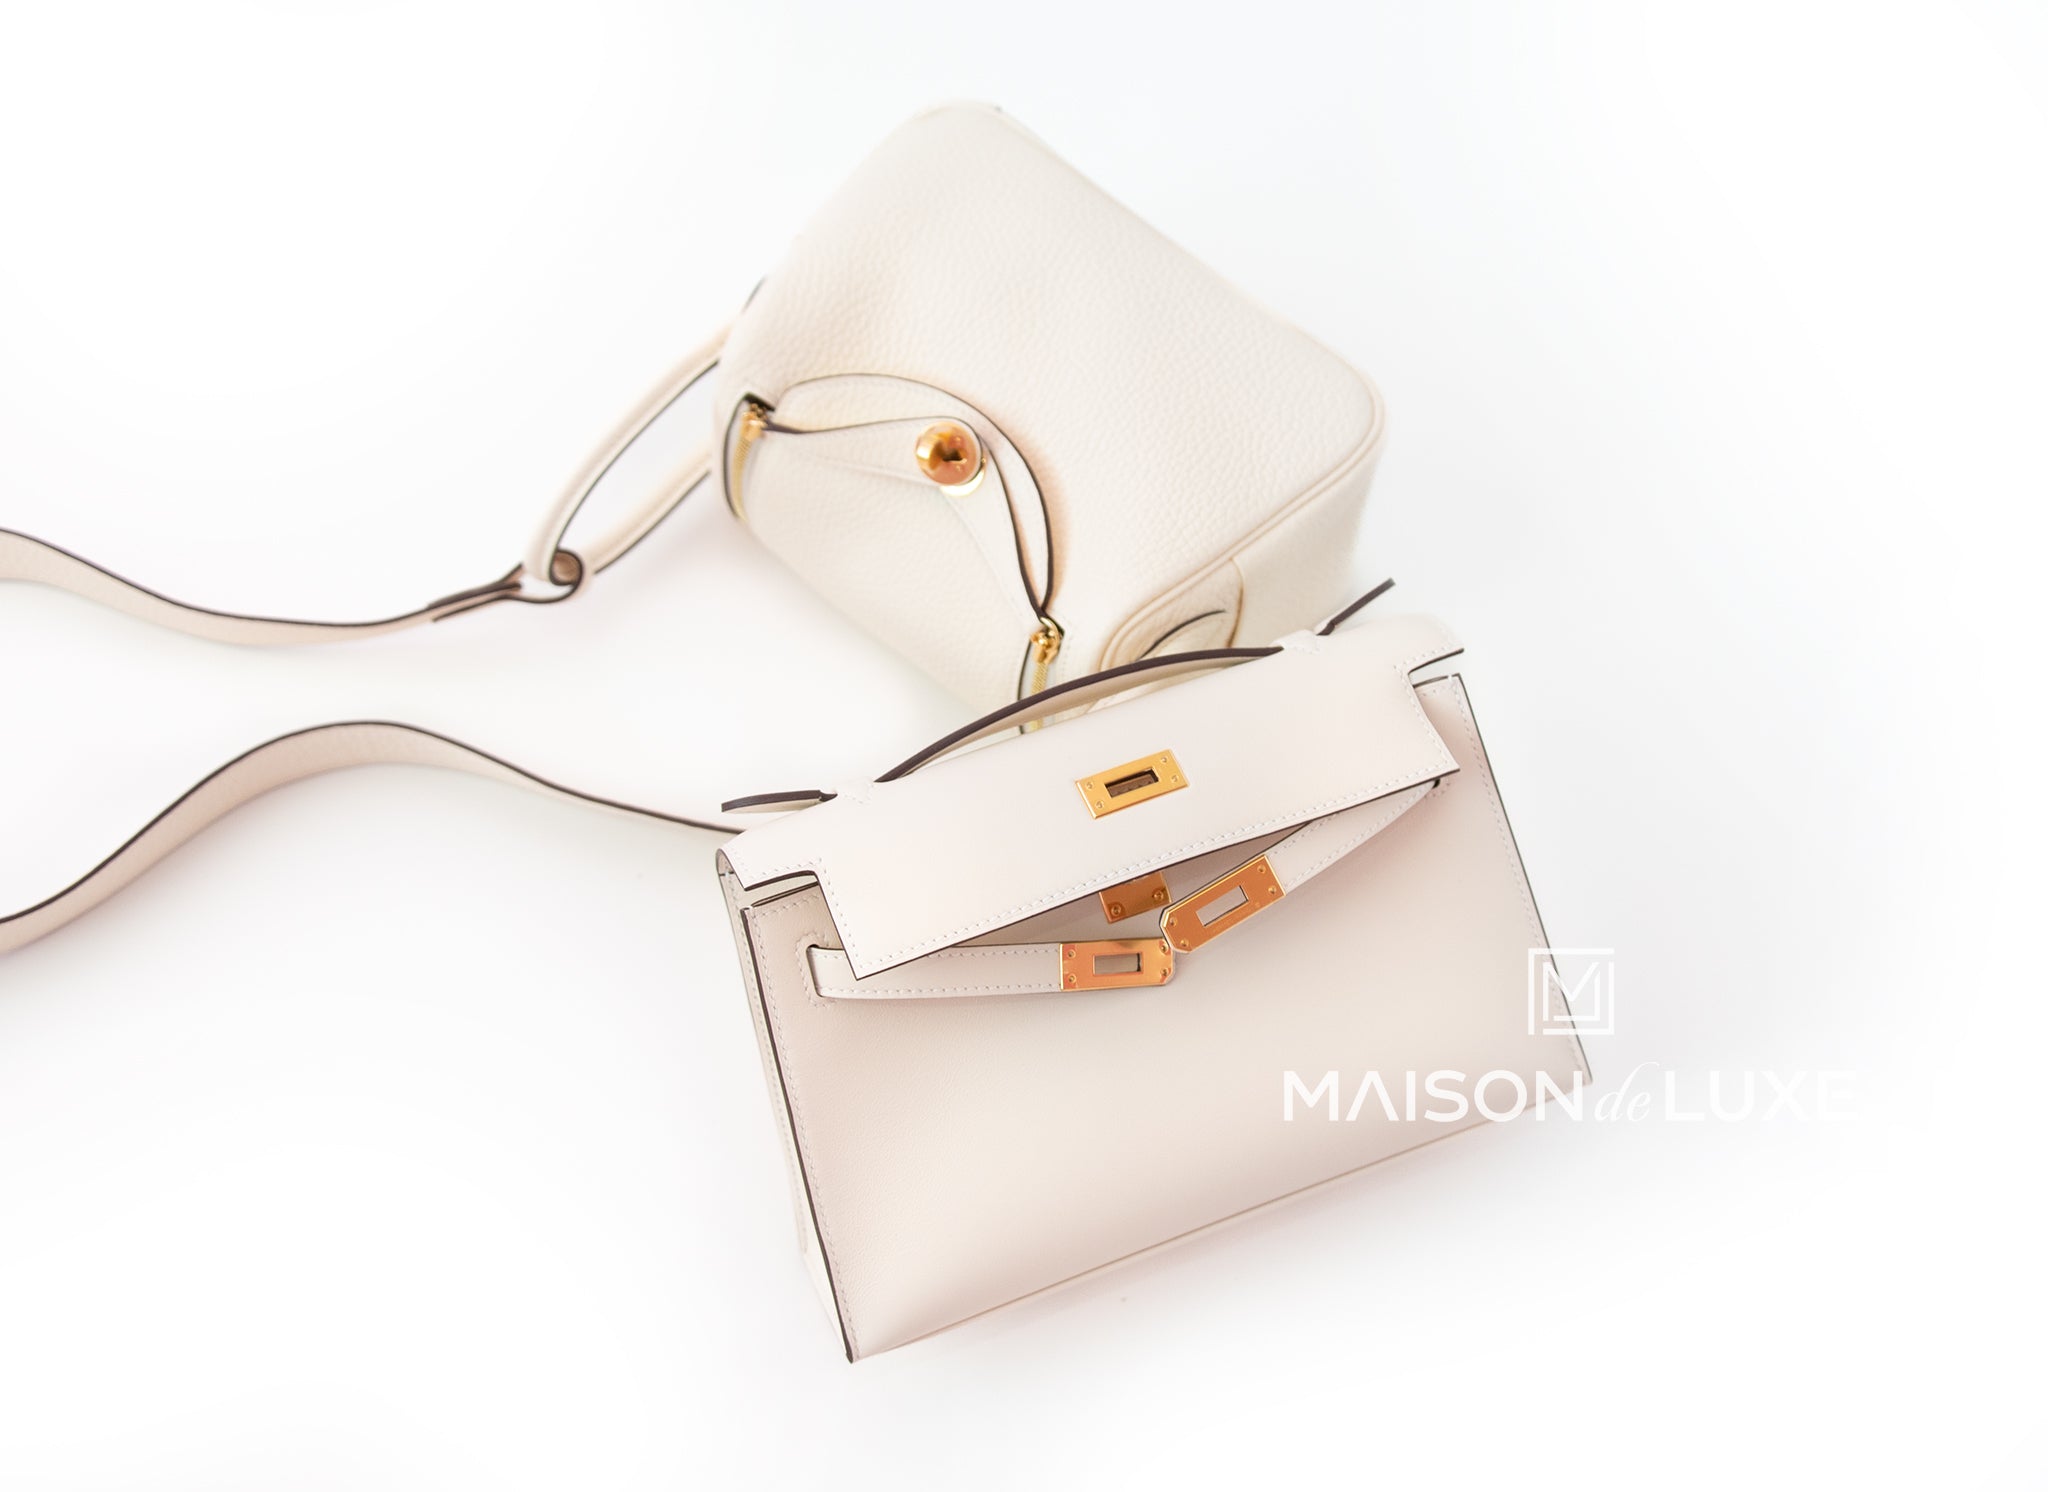 HERMÈS Mini Lindy shoulder bag in Nata Clemence leather with